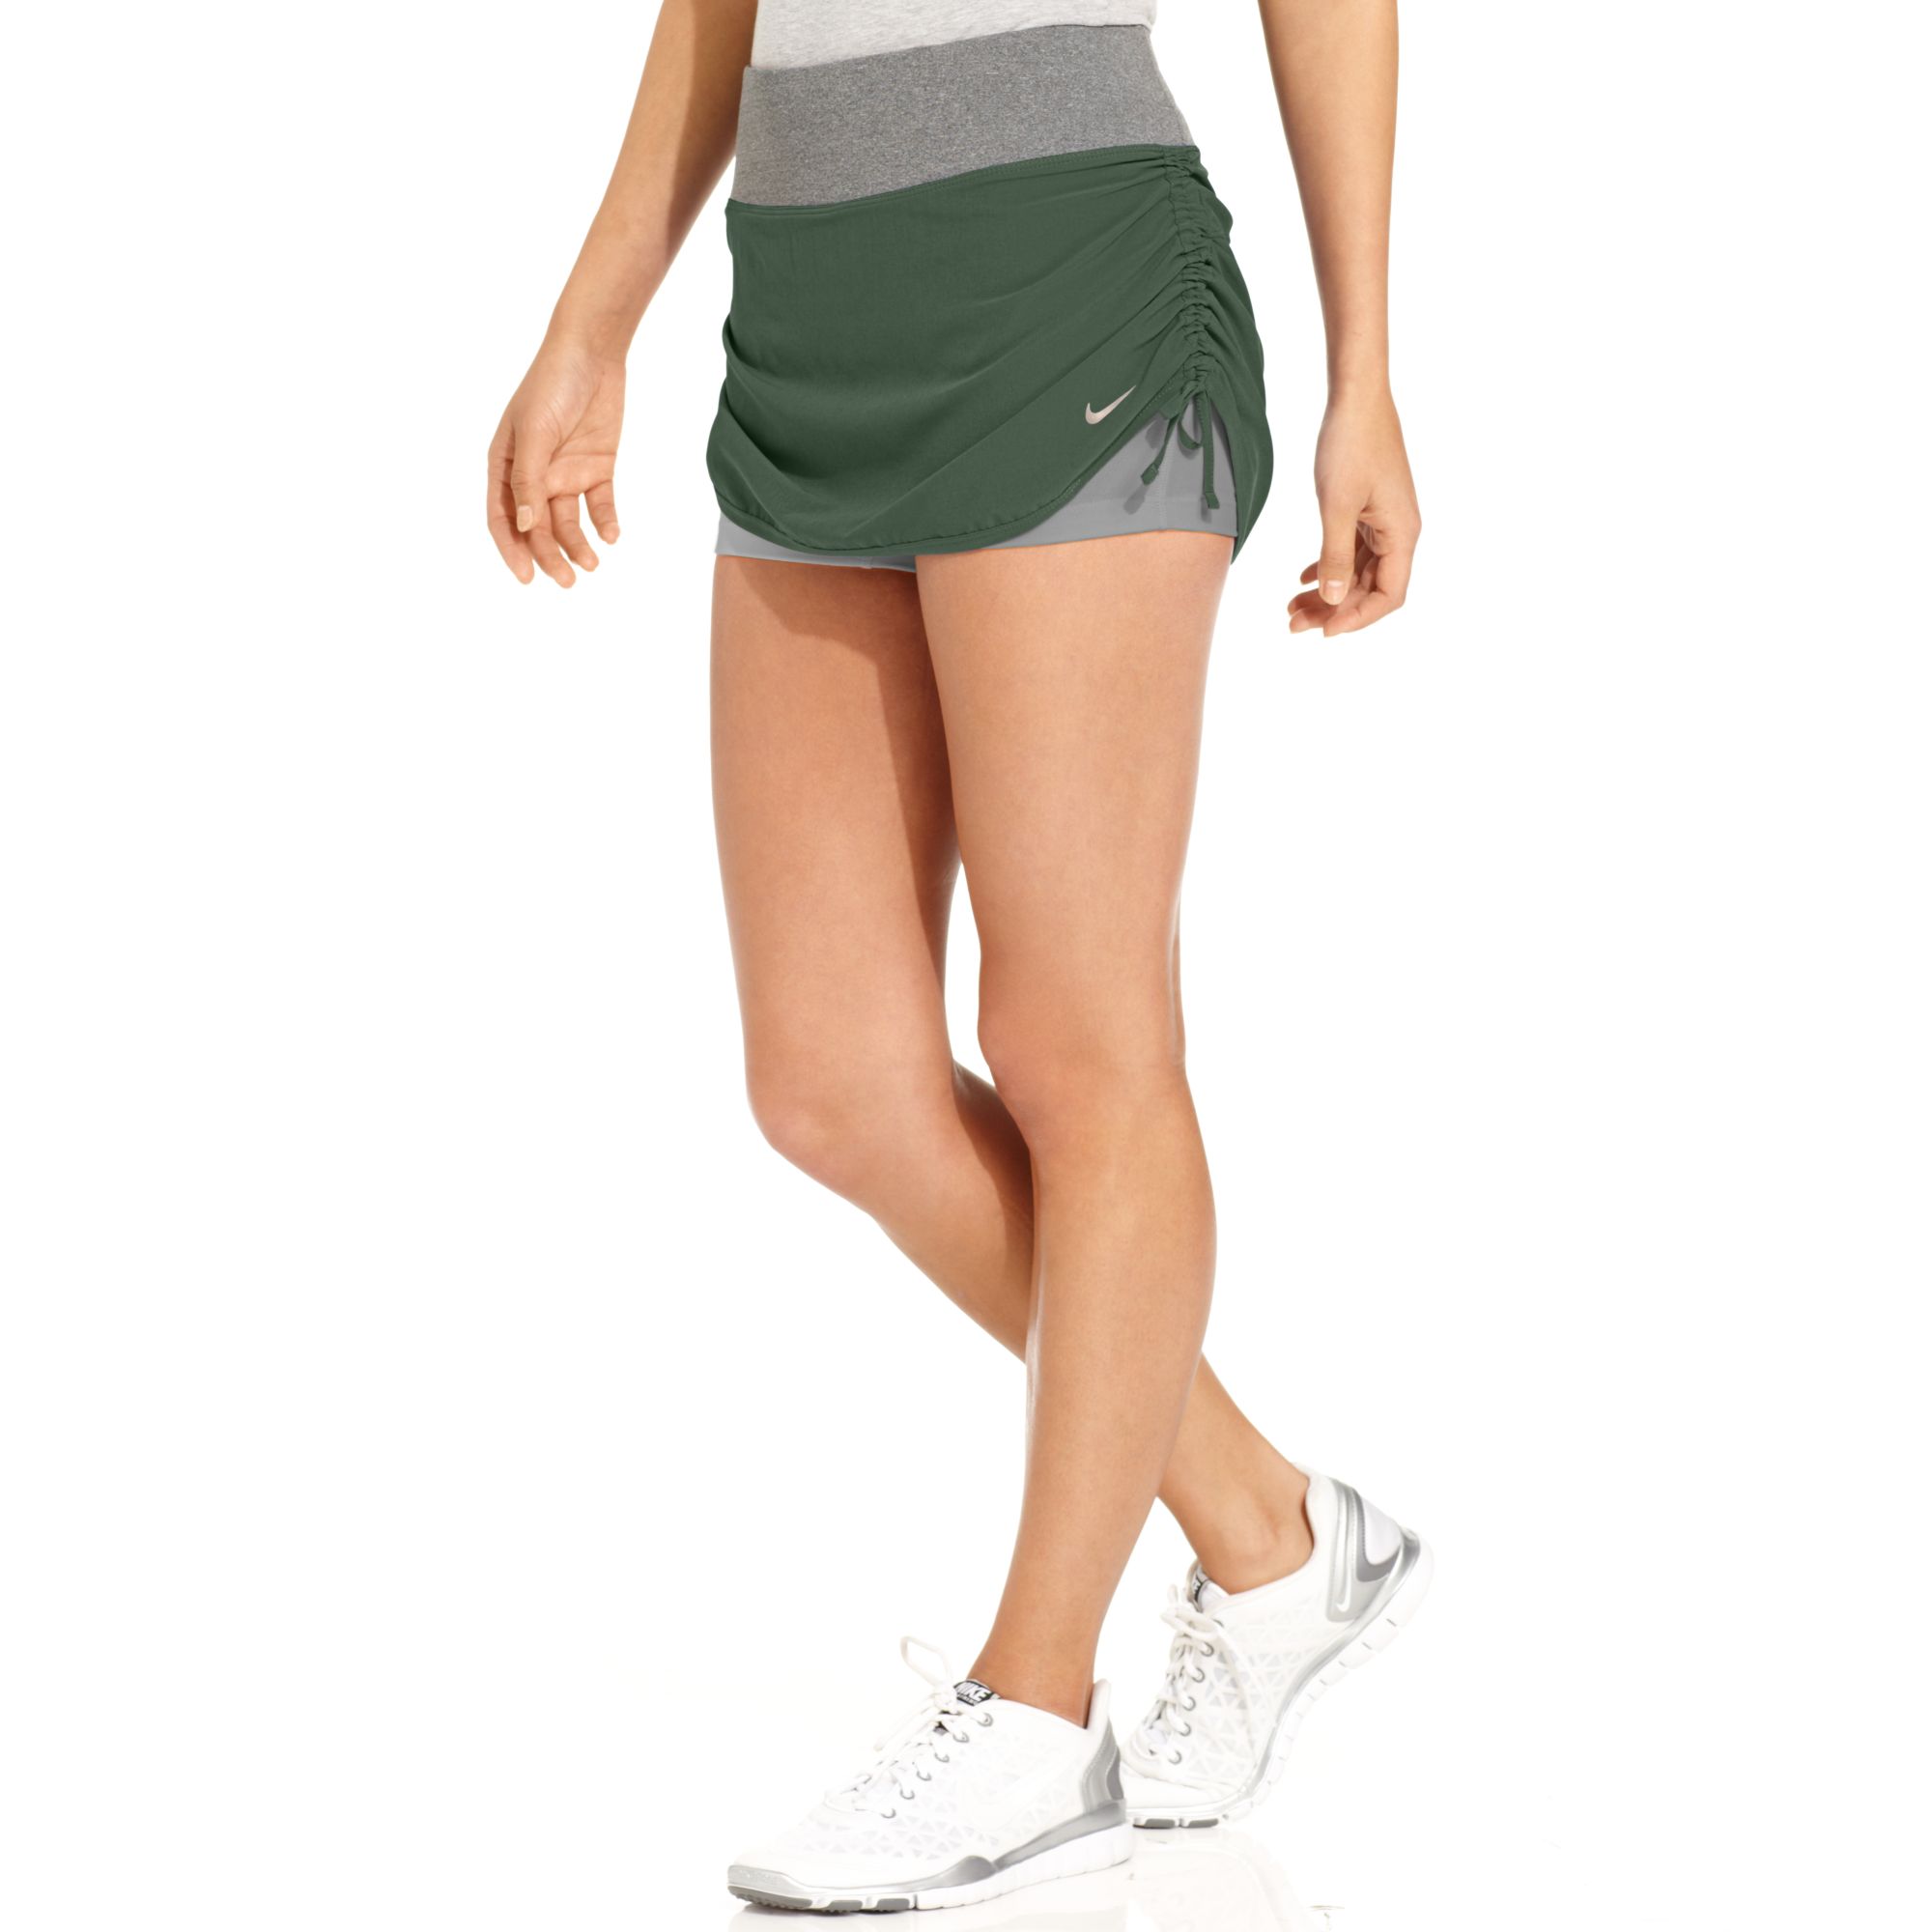 Nike Rival Drifit Ruched Skort in Green | Lyst